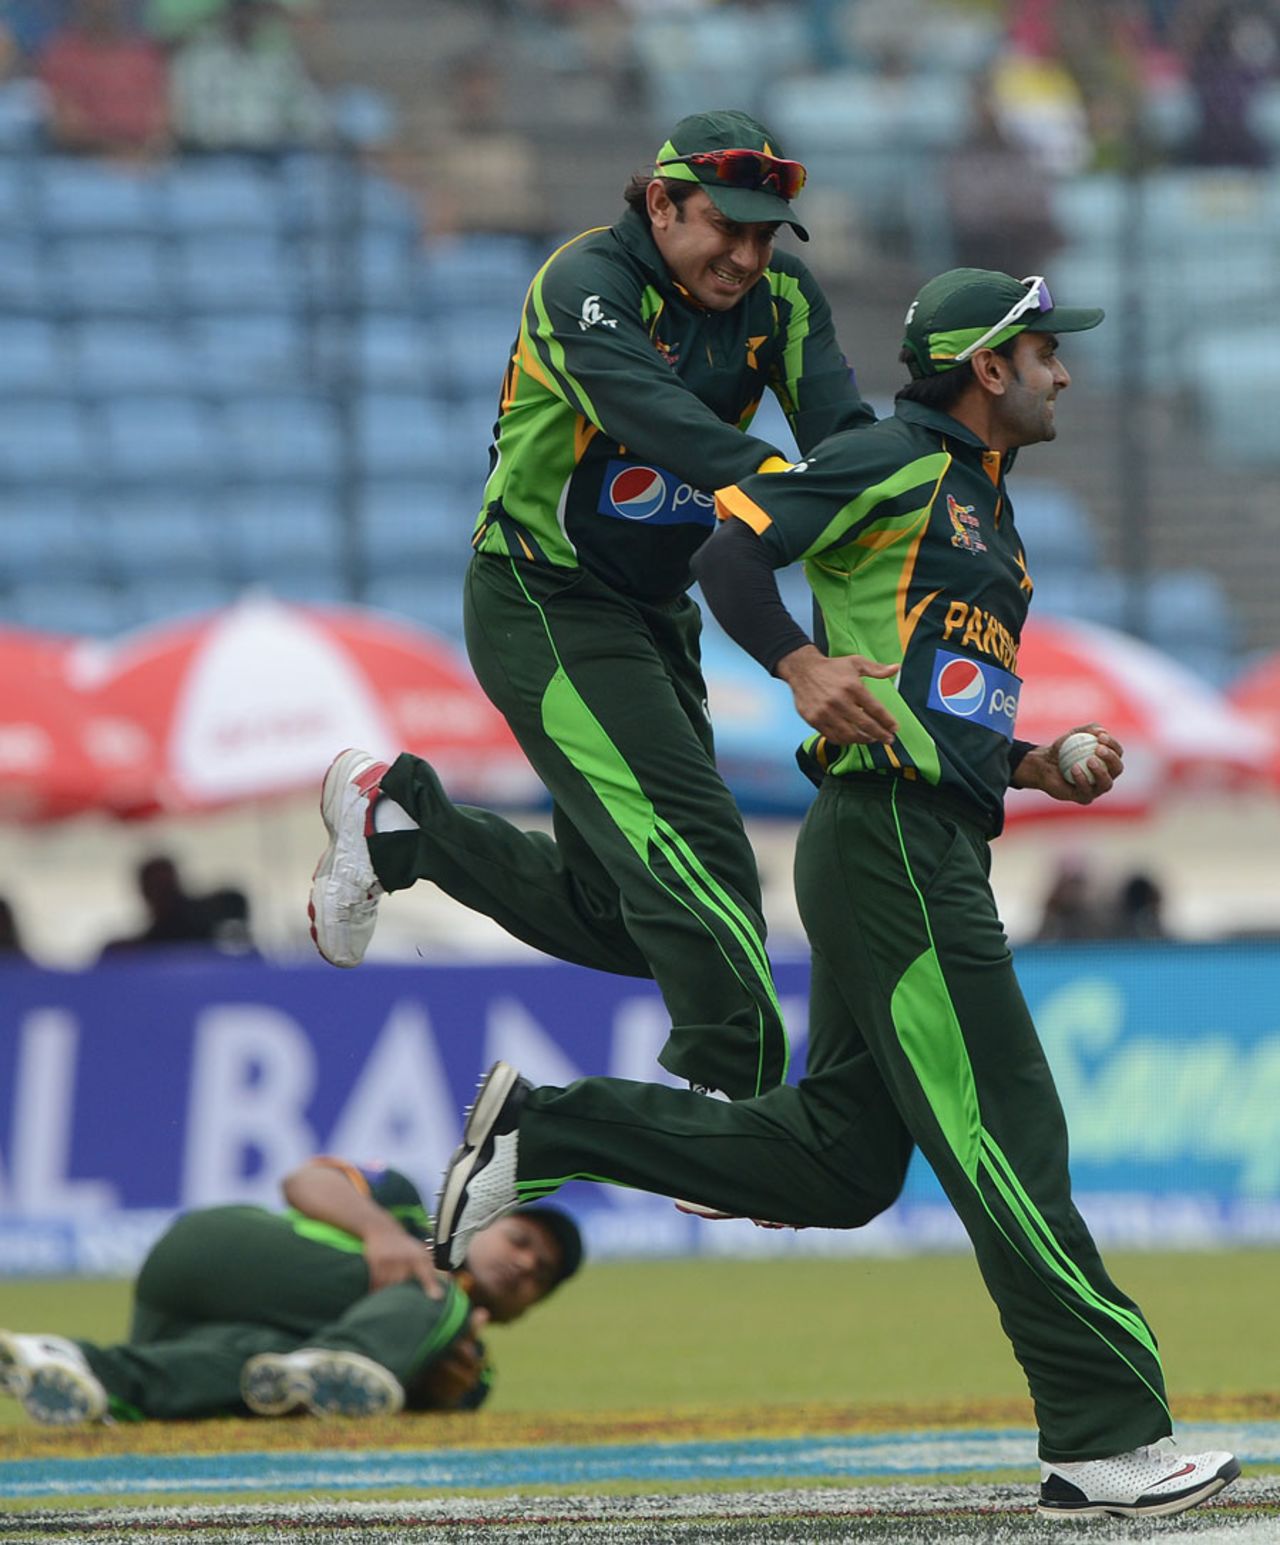 Mohammad Hafeez takes the catch to remove Rohit Sharma, India v Pakistan, Asia Cup, Mirpur, March 2, 2014